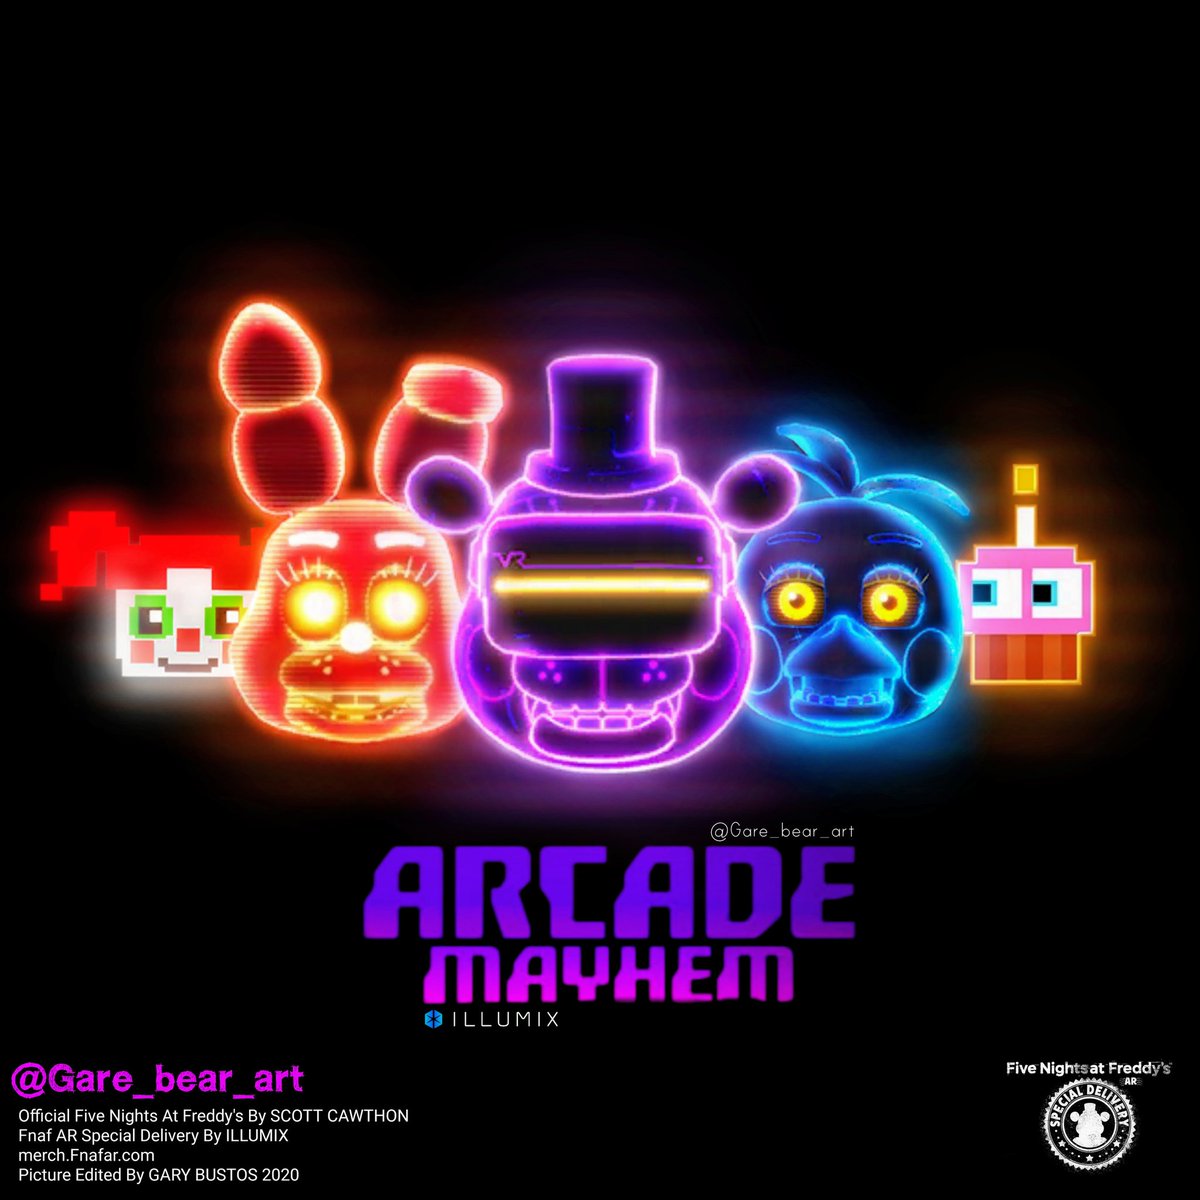 Twitter 上的 Gare_bear_art：New Fnaf AR Merch. This picture is not a merch. I edited this lol. But there are merch of the Arcade Mayhem Animatronics on